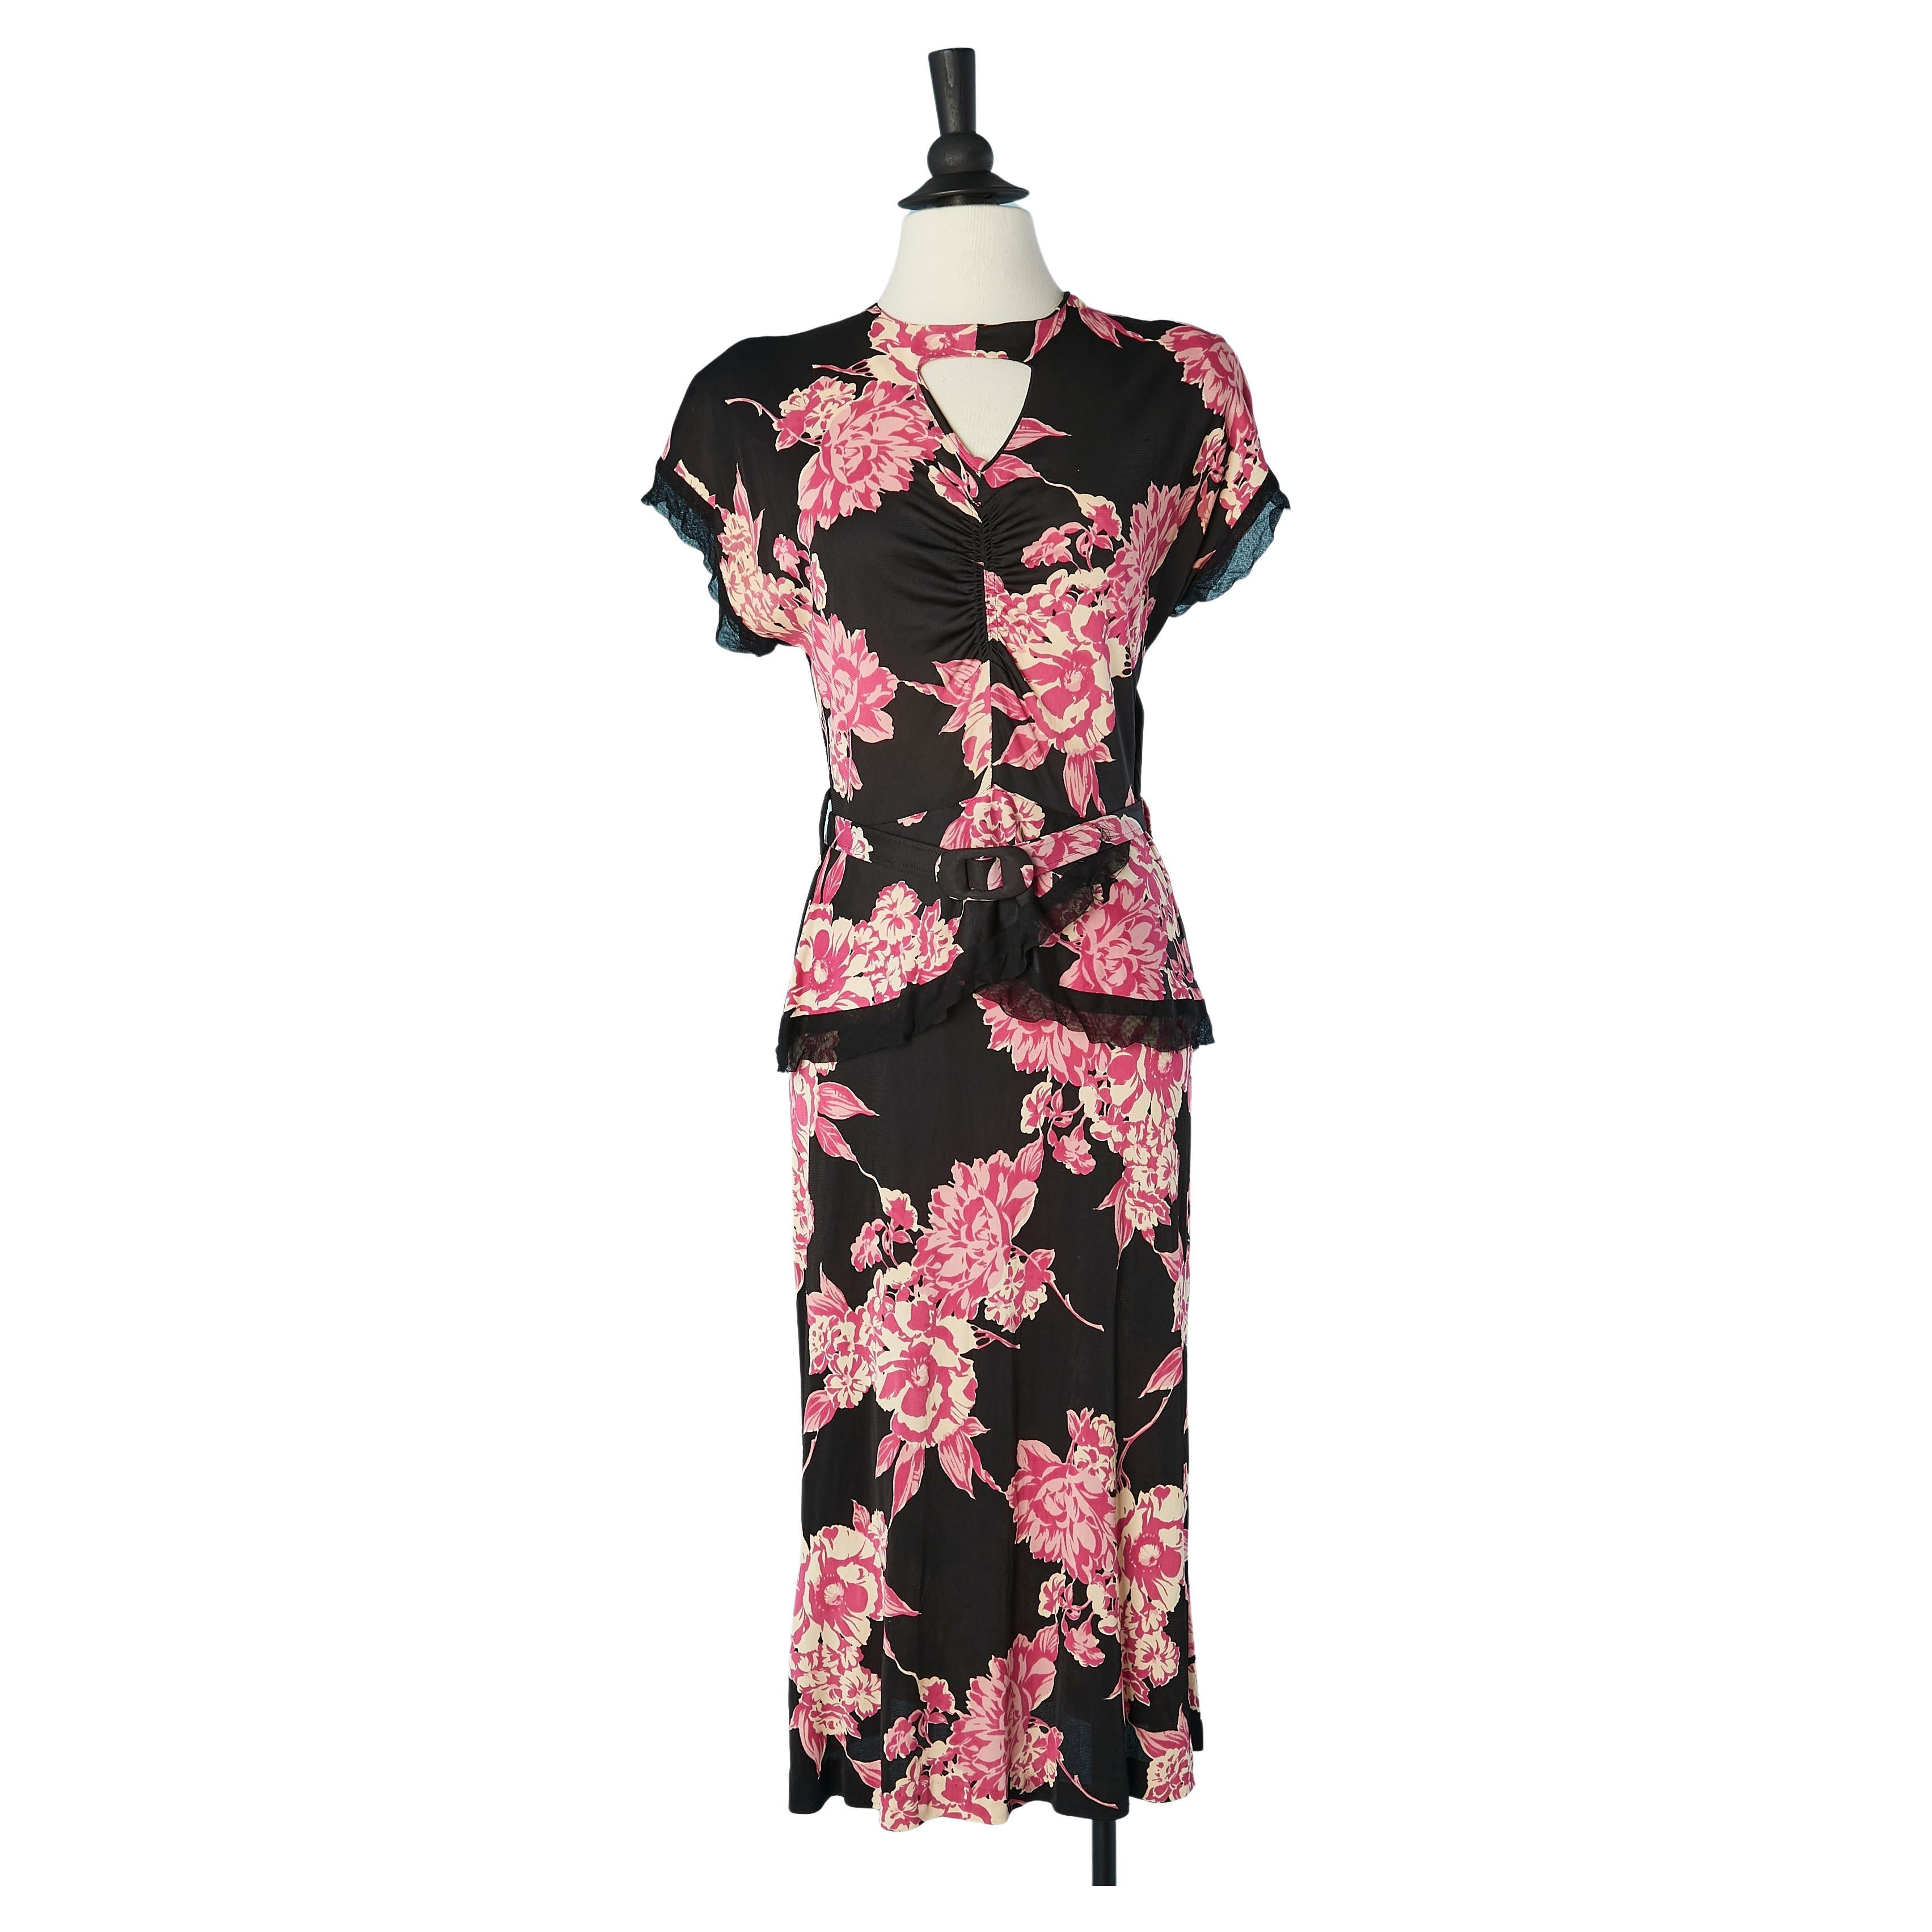 Circa 1940's jersey cocktail dress with pink flowers printed For Sale